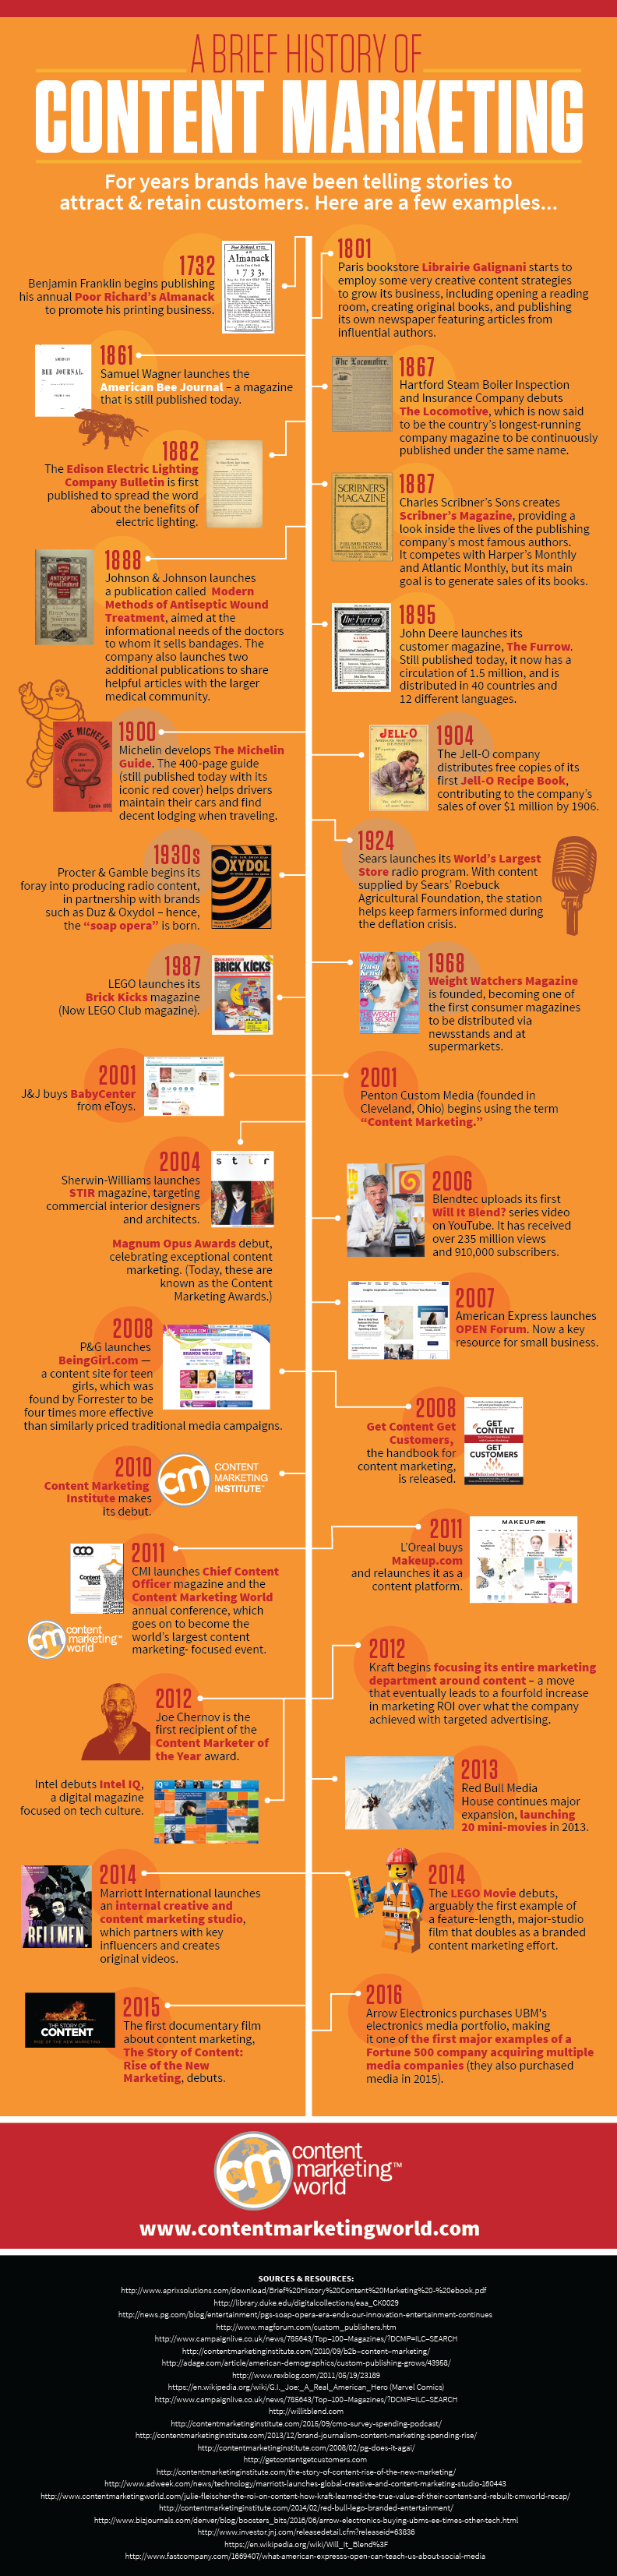 History of Content Marketing 2016